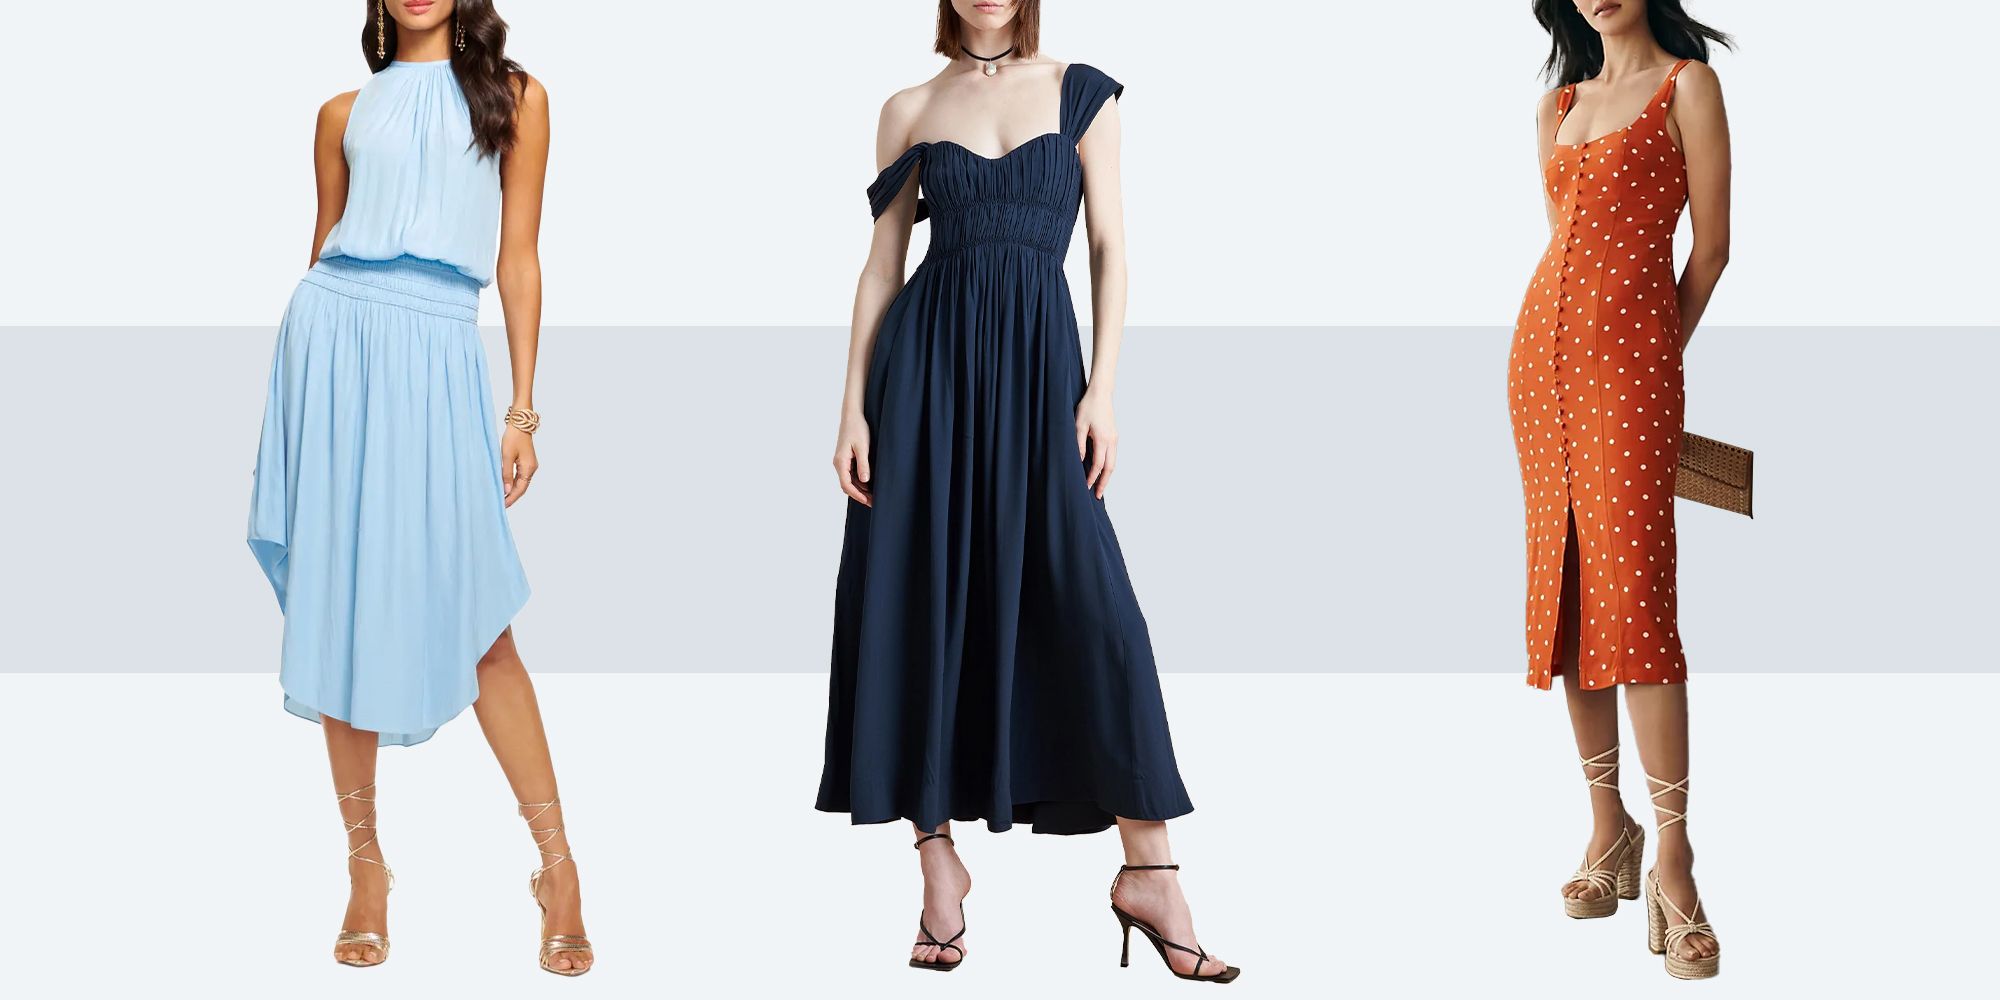 What to Wear to a Rehearsal Dinner as a Guest